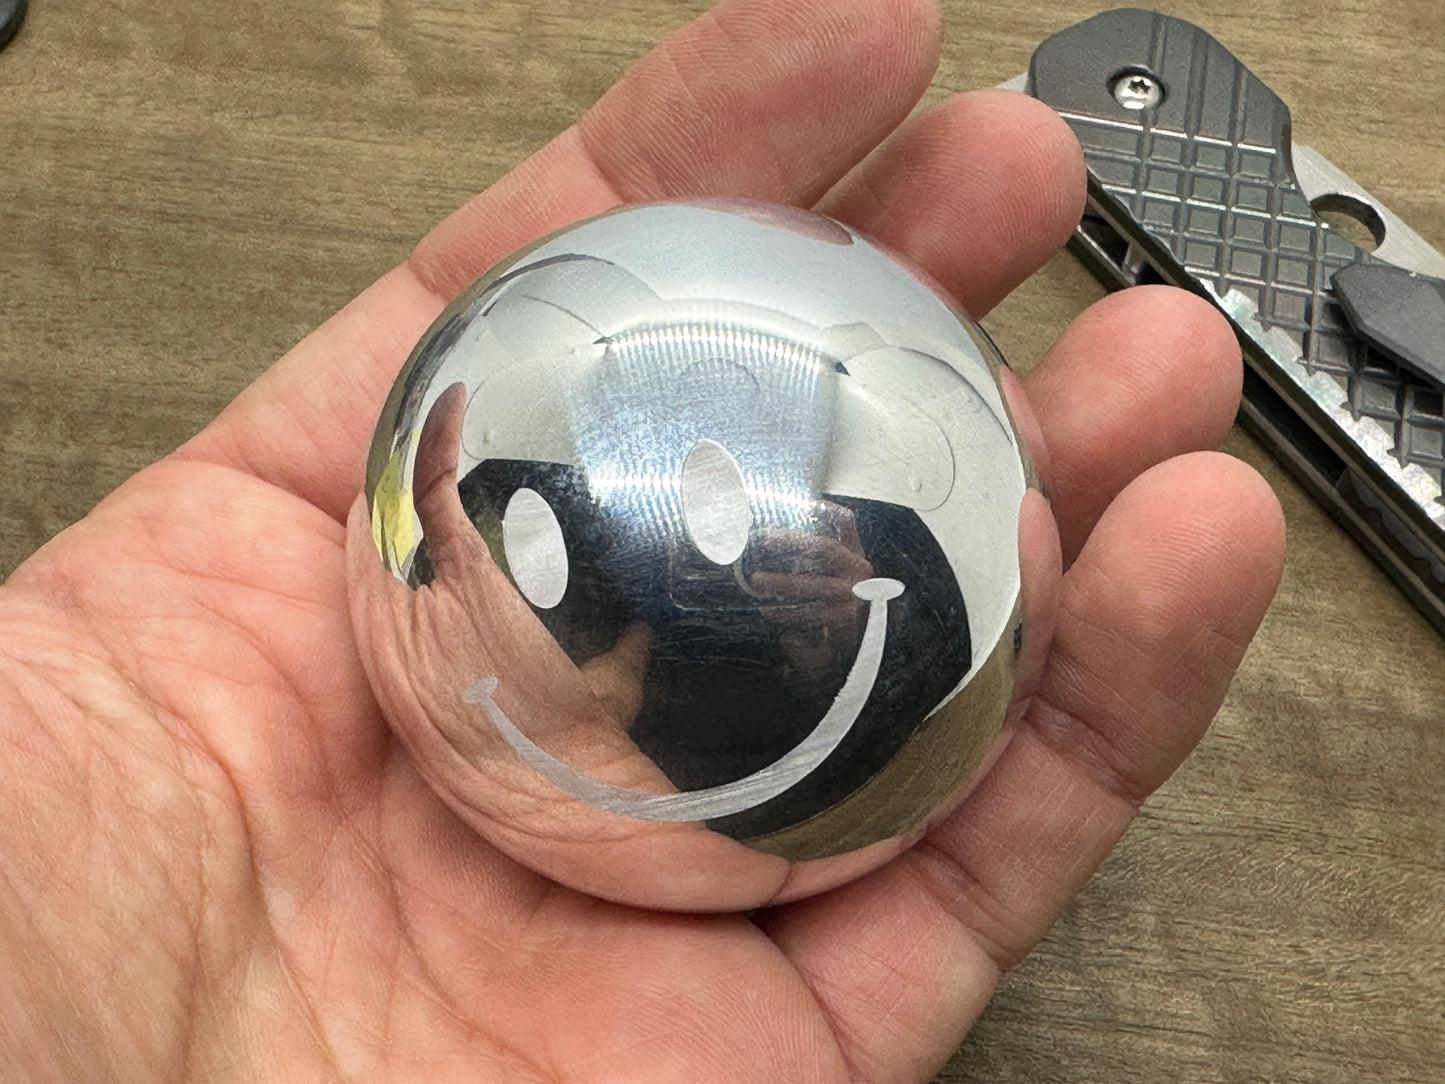 2.15" SMILEY Polished Solid Aerospace Grade Aluminum SPHERE +TurboGlow stand